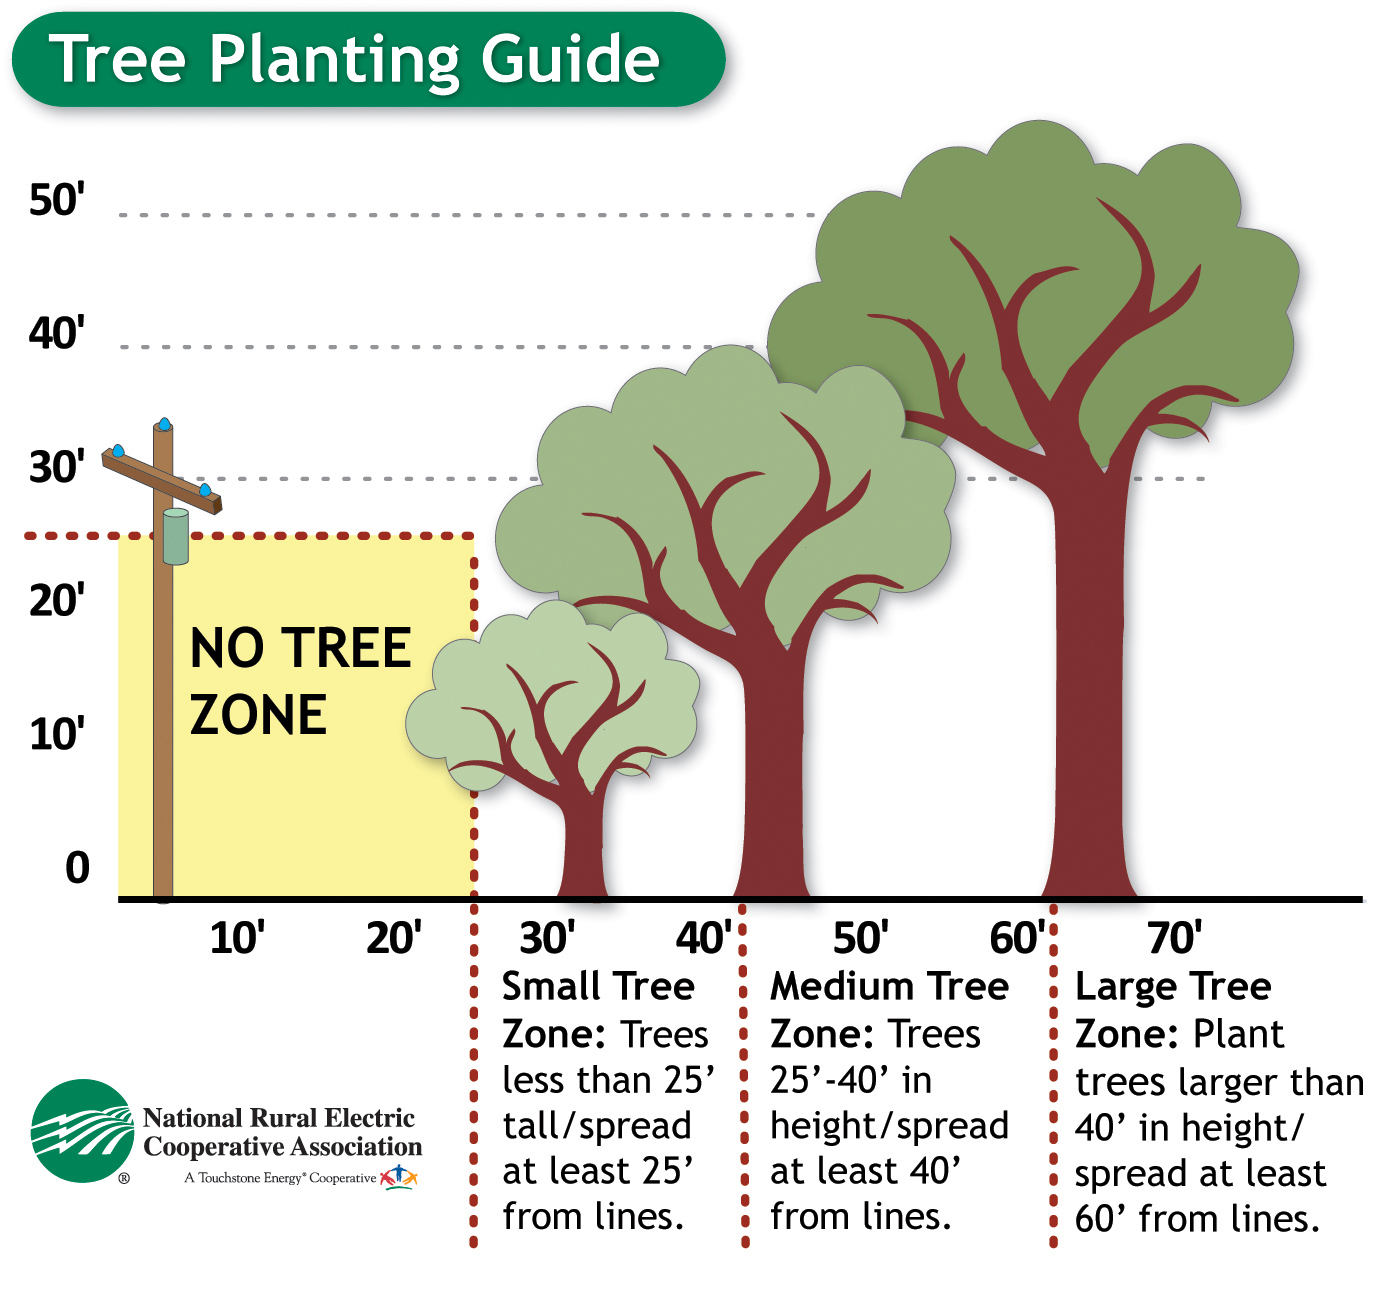 Tree Planting Guide: 0' to 25' - NO TREE ZONE, 25' to 40' - Small Tree Zone (Trees less than 25' tall/spread at least 25' from lines), 42' to 60' - Medium Tree Zone (Trees 25' - 40' in height/spread at least 40' from lines), 62' - 70' - Large Tree Zone (Plant trees larger than 40' in height/spread at least 60' from lines)